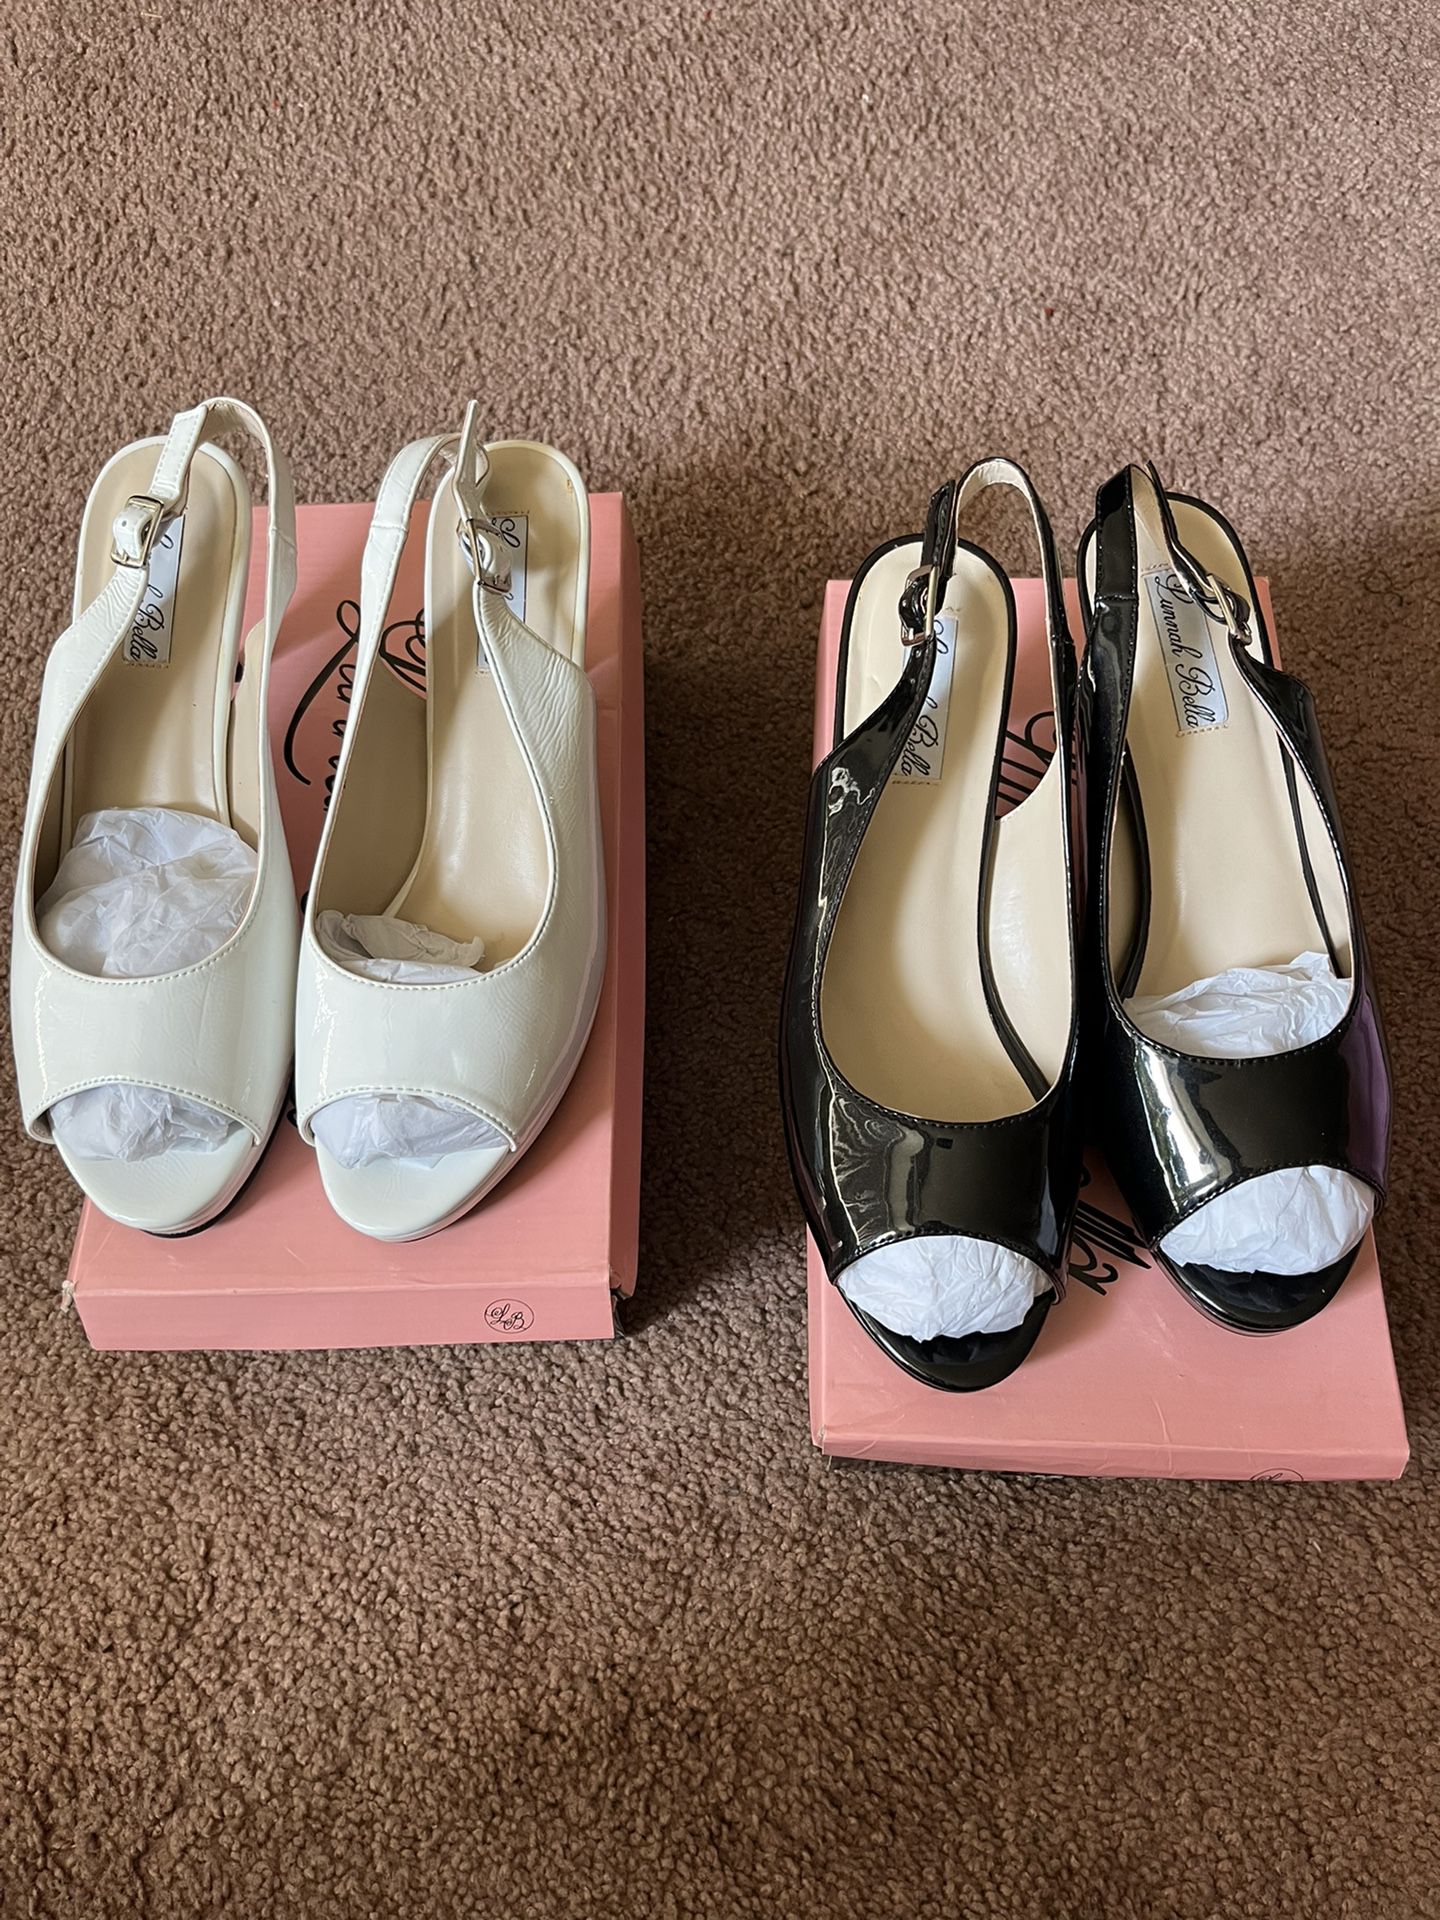 Women Dress Shoes White Soft Leather)B.Patent leather Size 9W..1 1/2  or 2 Inch Heel White New Never Worn..Black Pair Worn Once $40 Each..Both For $60